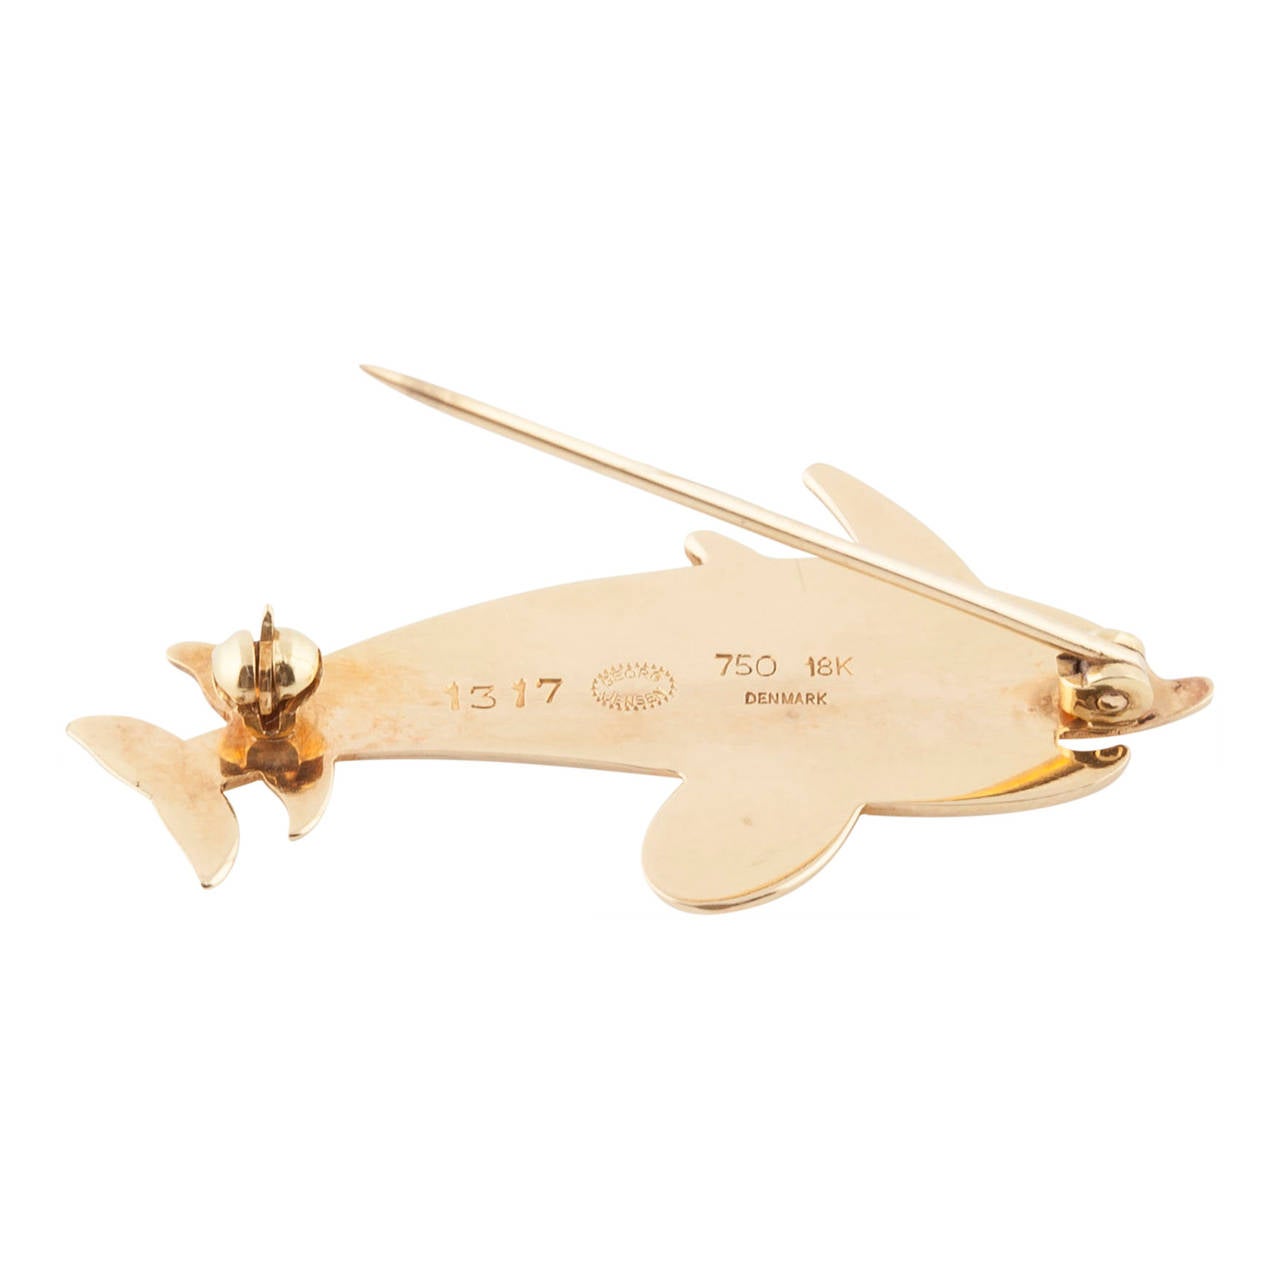 A rare 18ct yellow gold brooch of double leaping dolphins, designed by Arno Malinowski for George Jensen Jewellery. This design is no longer in production. Gold Jensen is also very rare and therefore sought after. It is fastened with a hinged pin